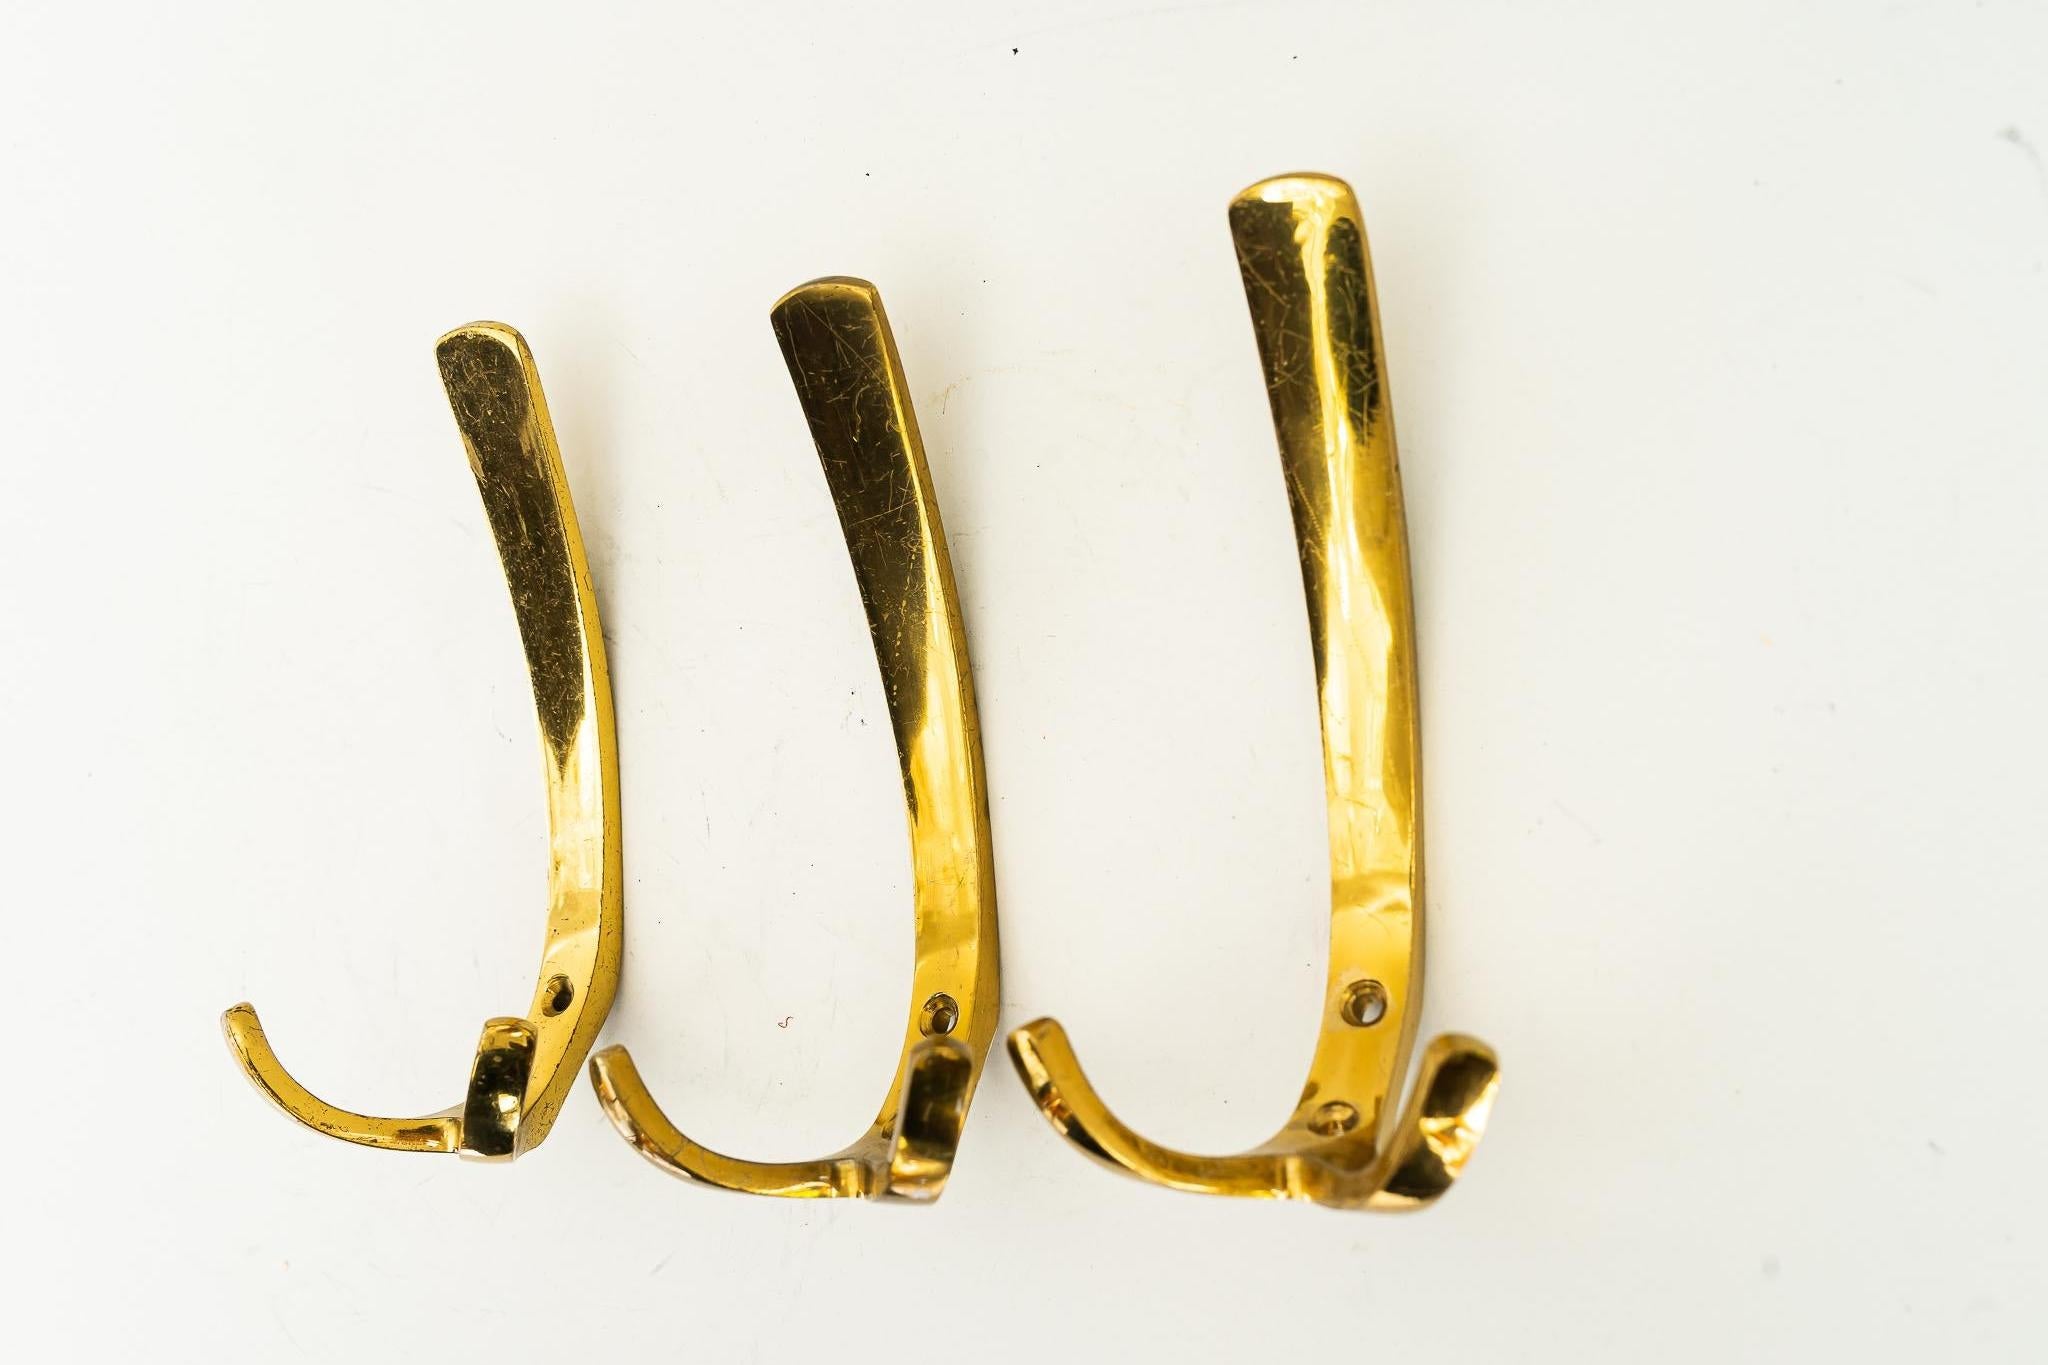 Austrian wall hooks by Hertha Baller, 1950s
Price and sell per piece
Original condition.